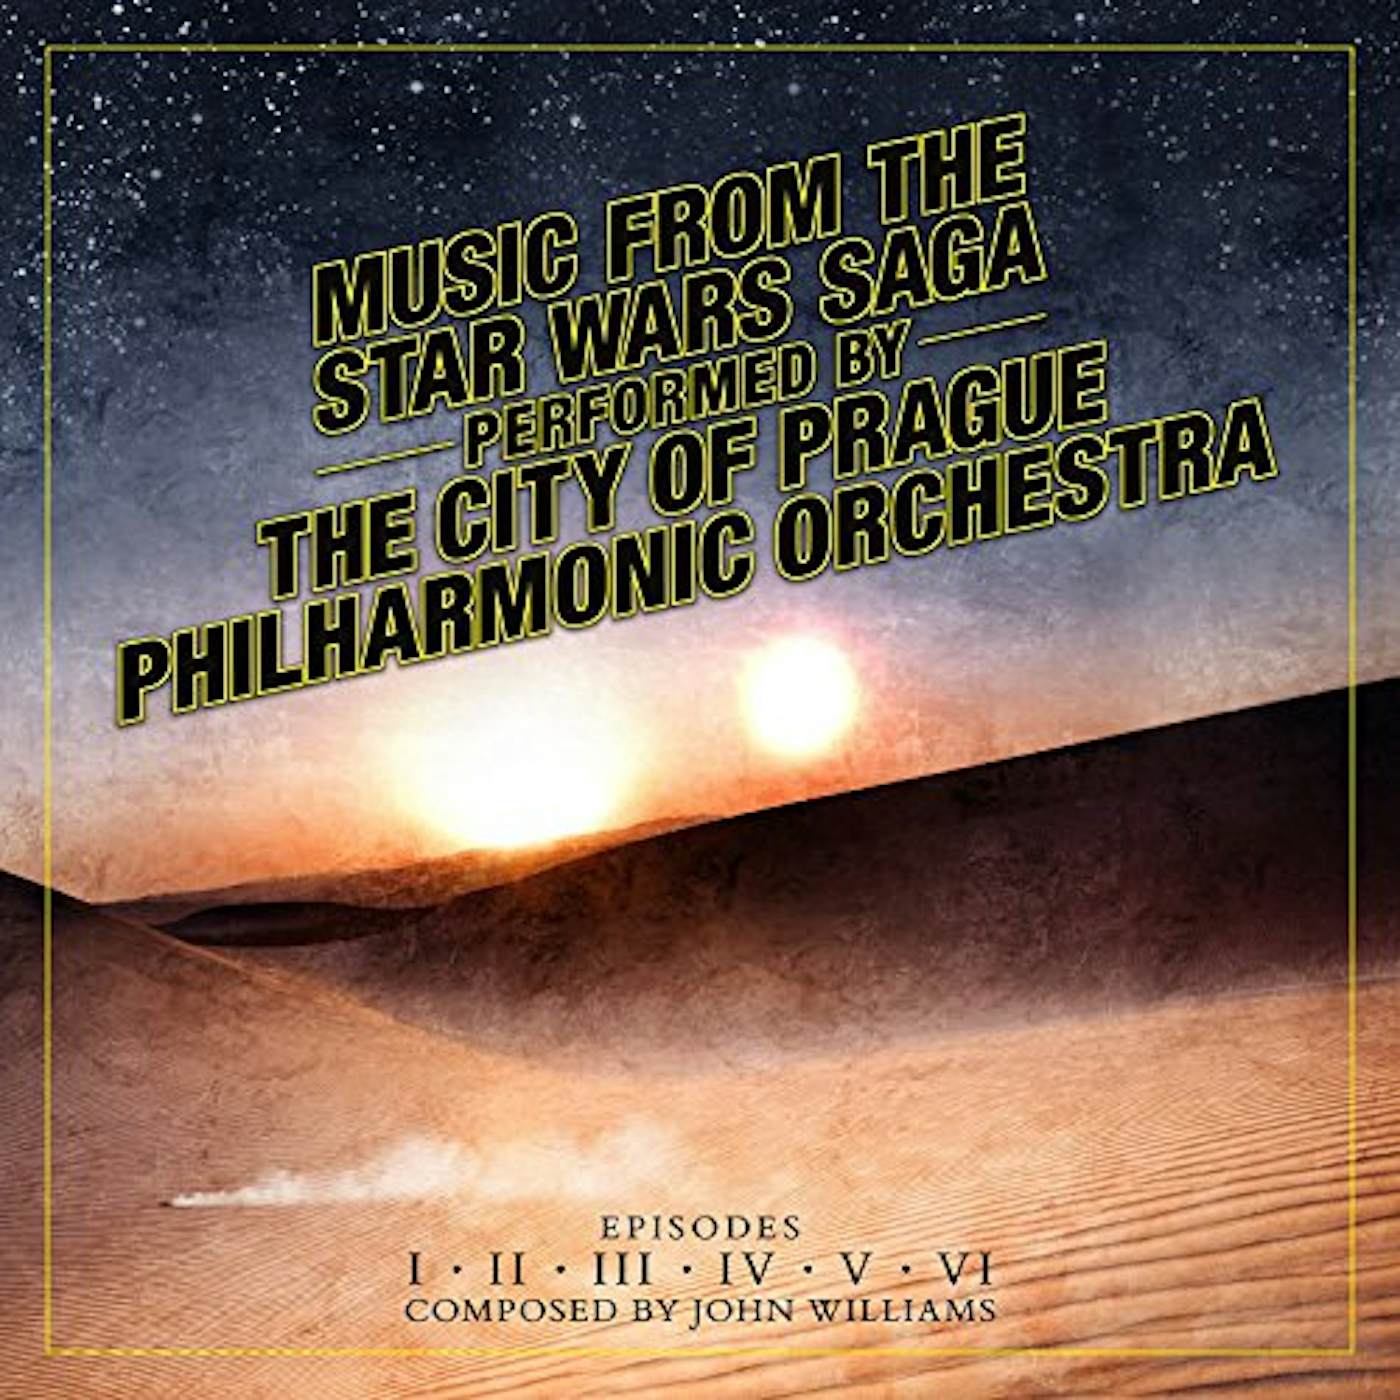 The City of Prague Philharmonic Orchestra MUSIC FROM THE STAR WARS SAGA CD